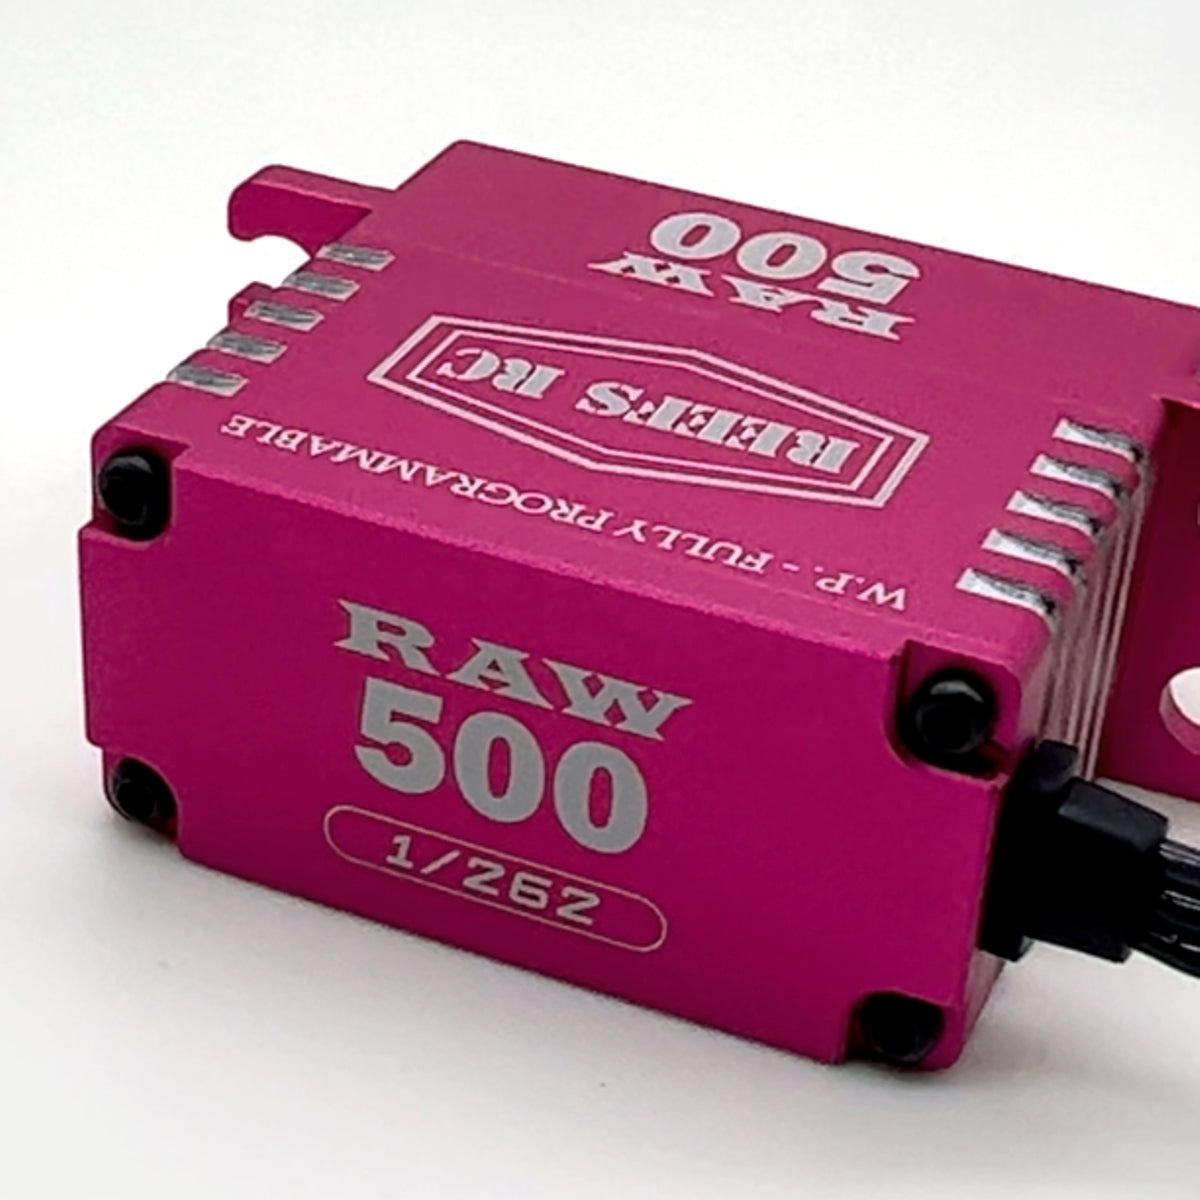 Limited Edition RAW 500 PINK